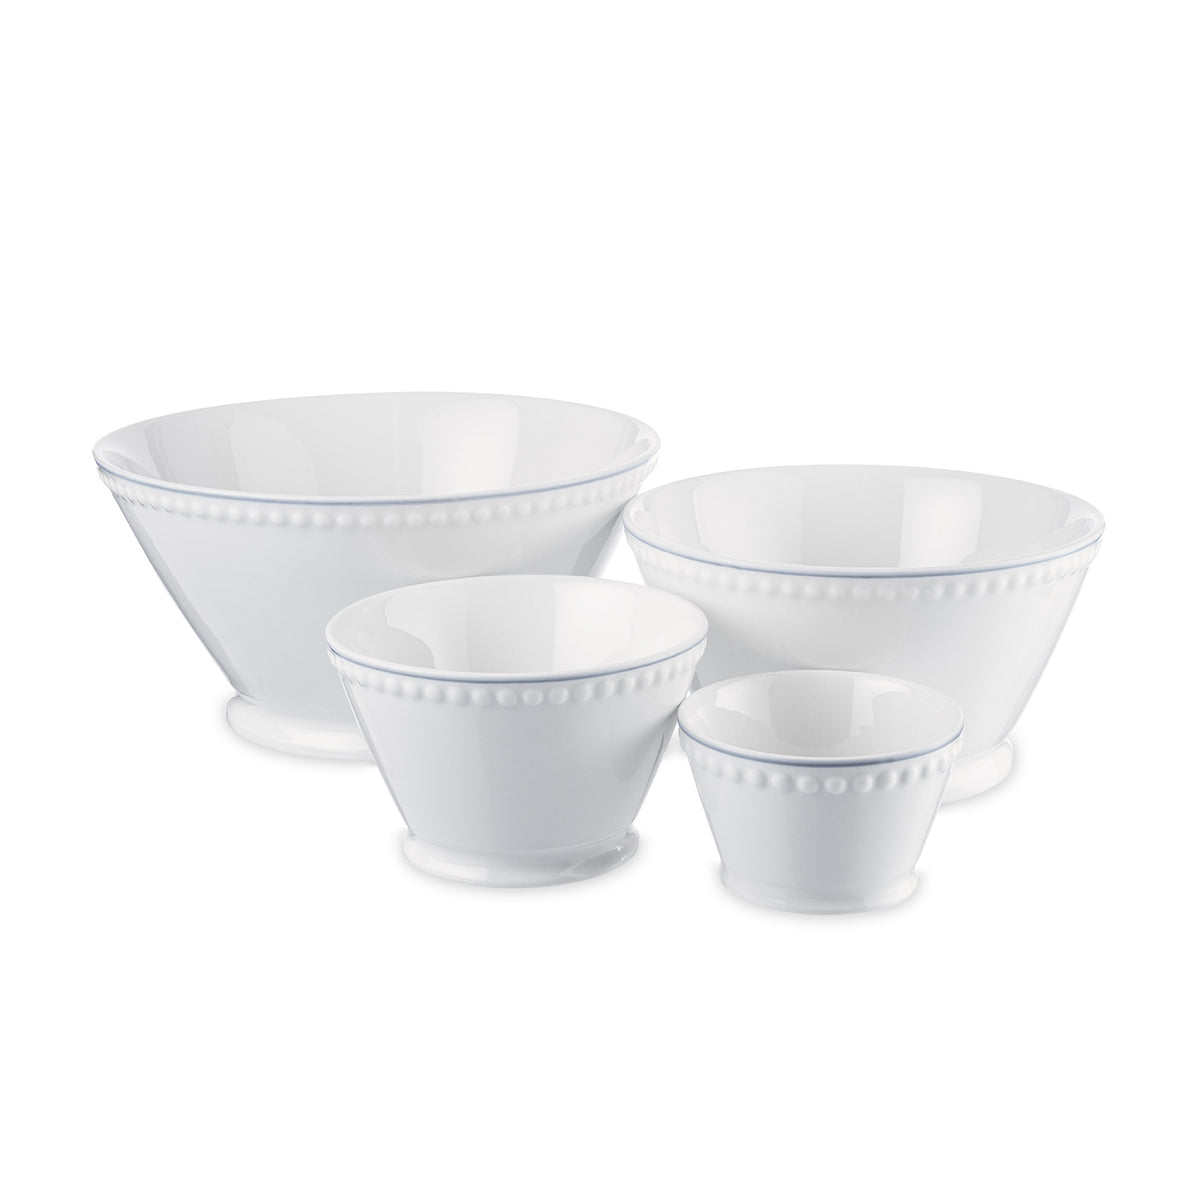 Mary Berry Signature Serving Bowls